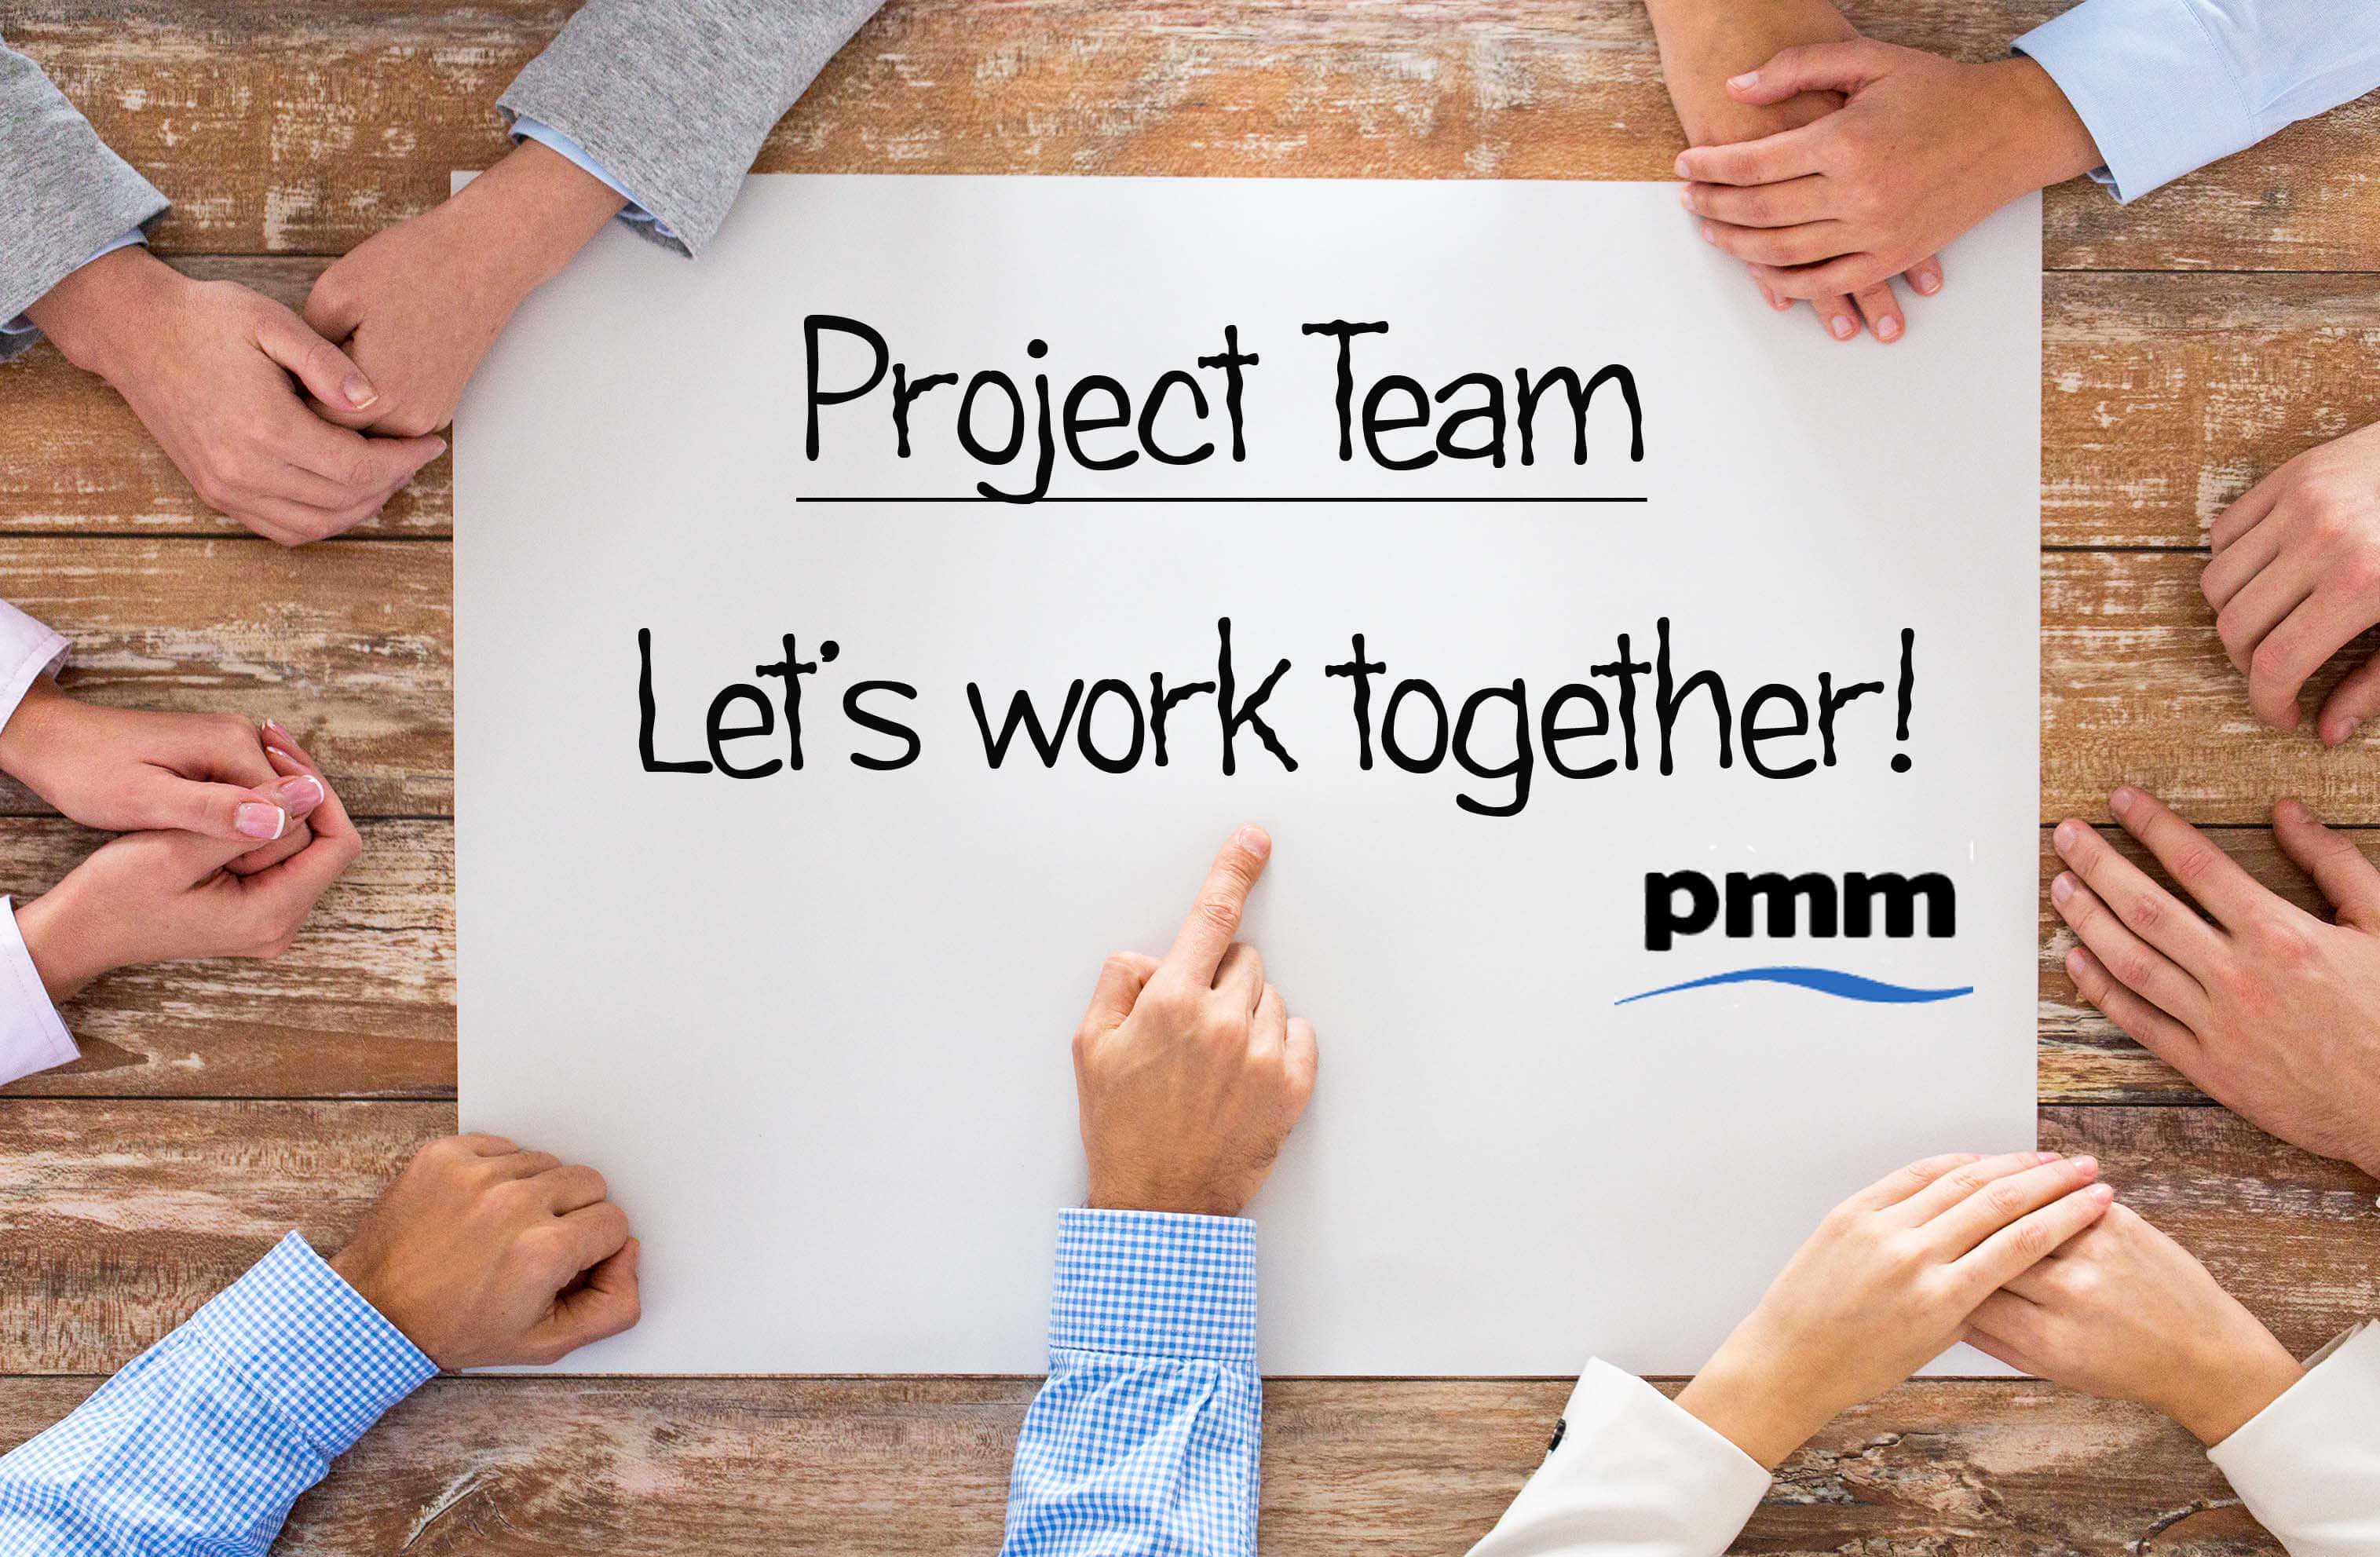 Project team working together